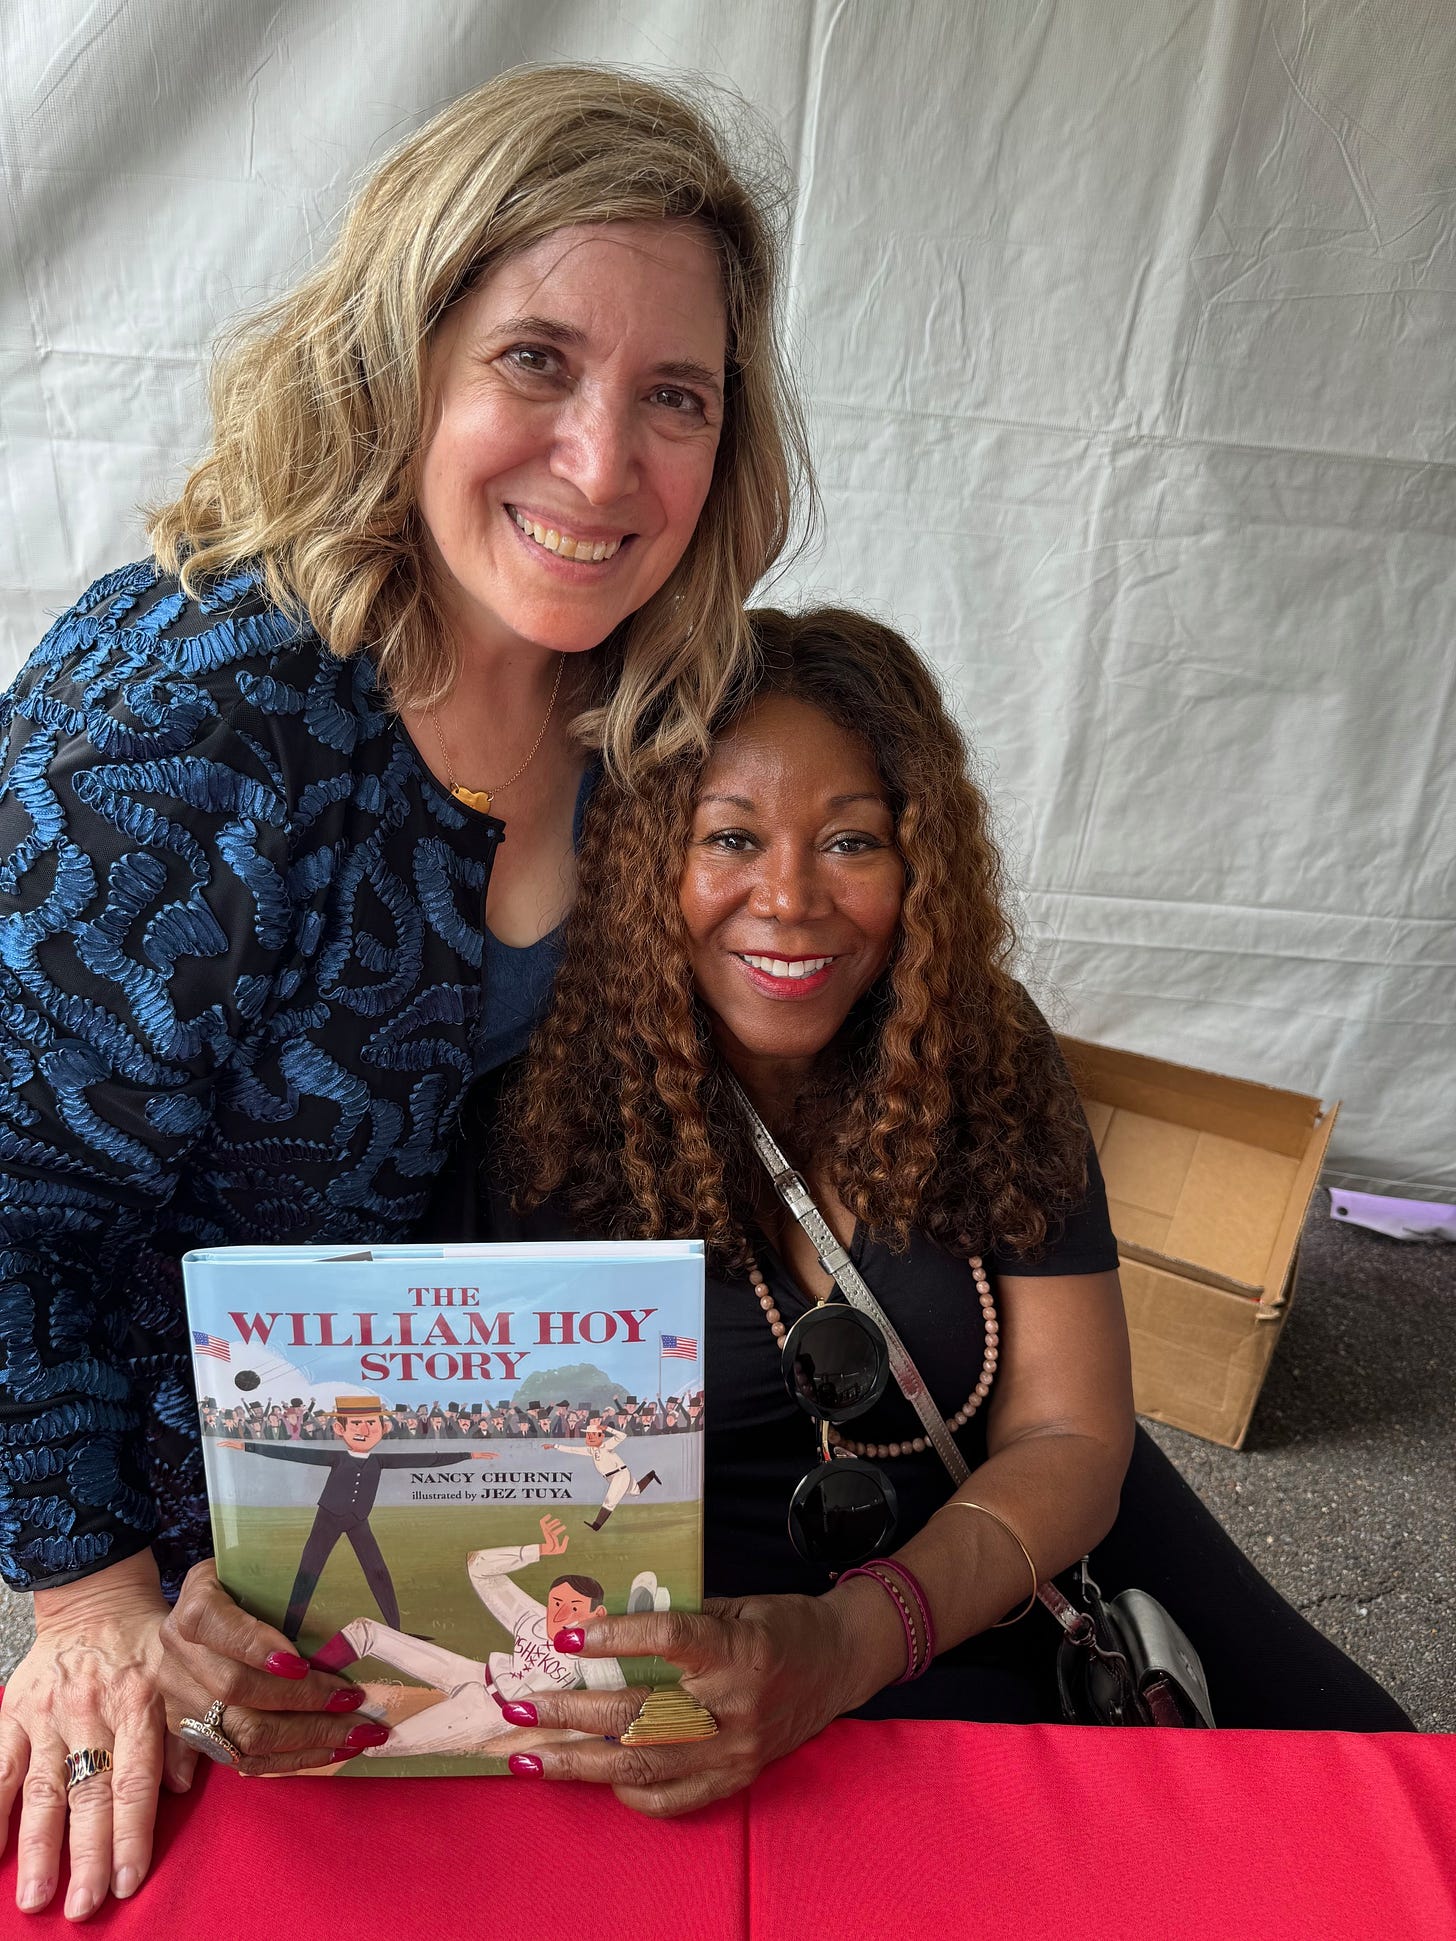 Author Nancy Churnin with Ruby Bridges and The William Hoy Story book.